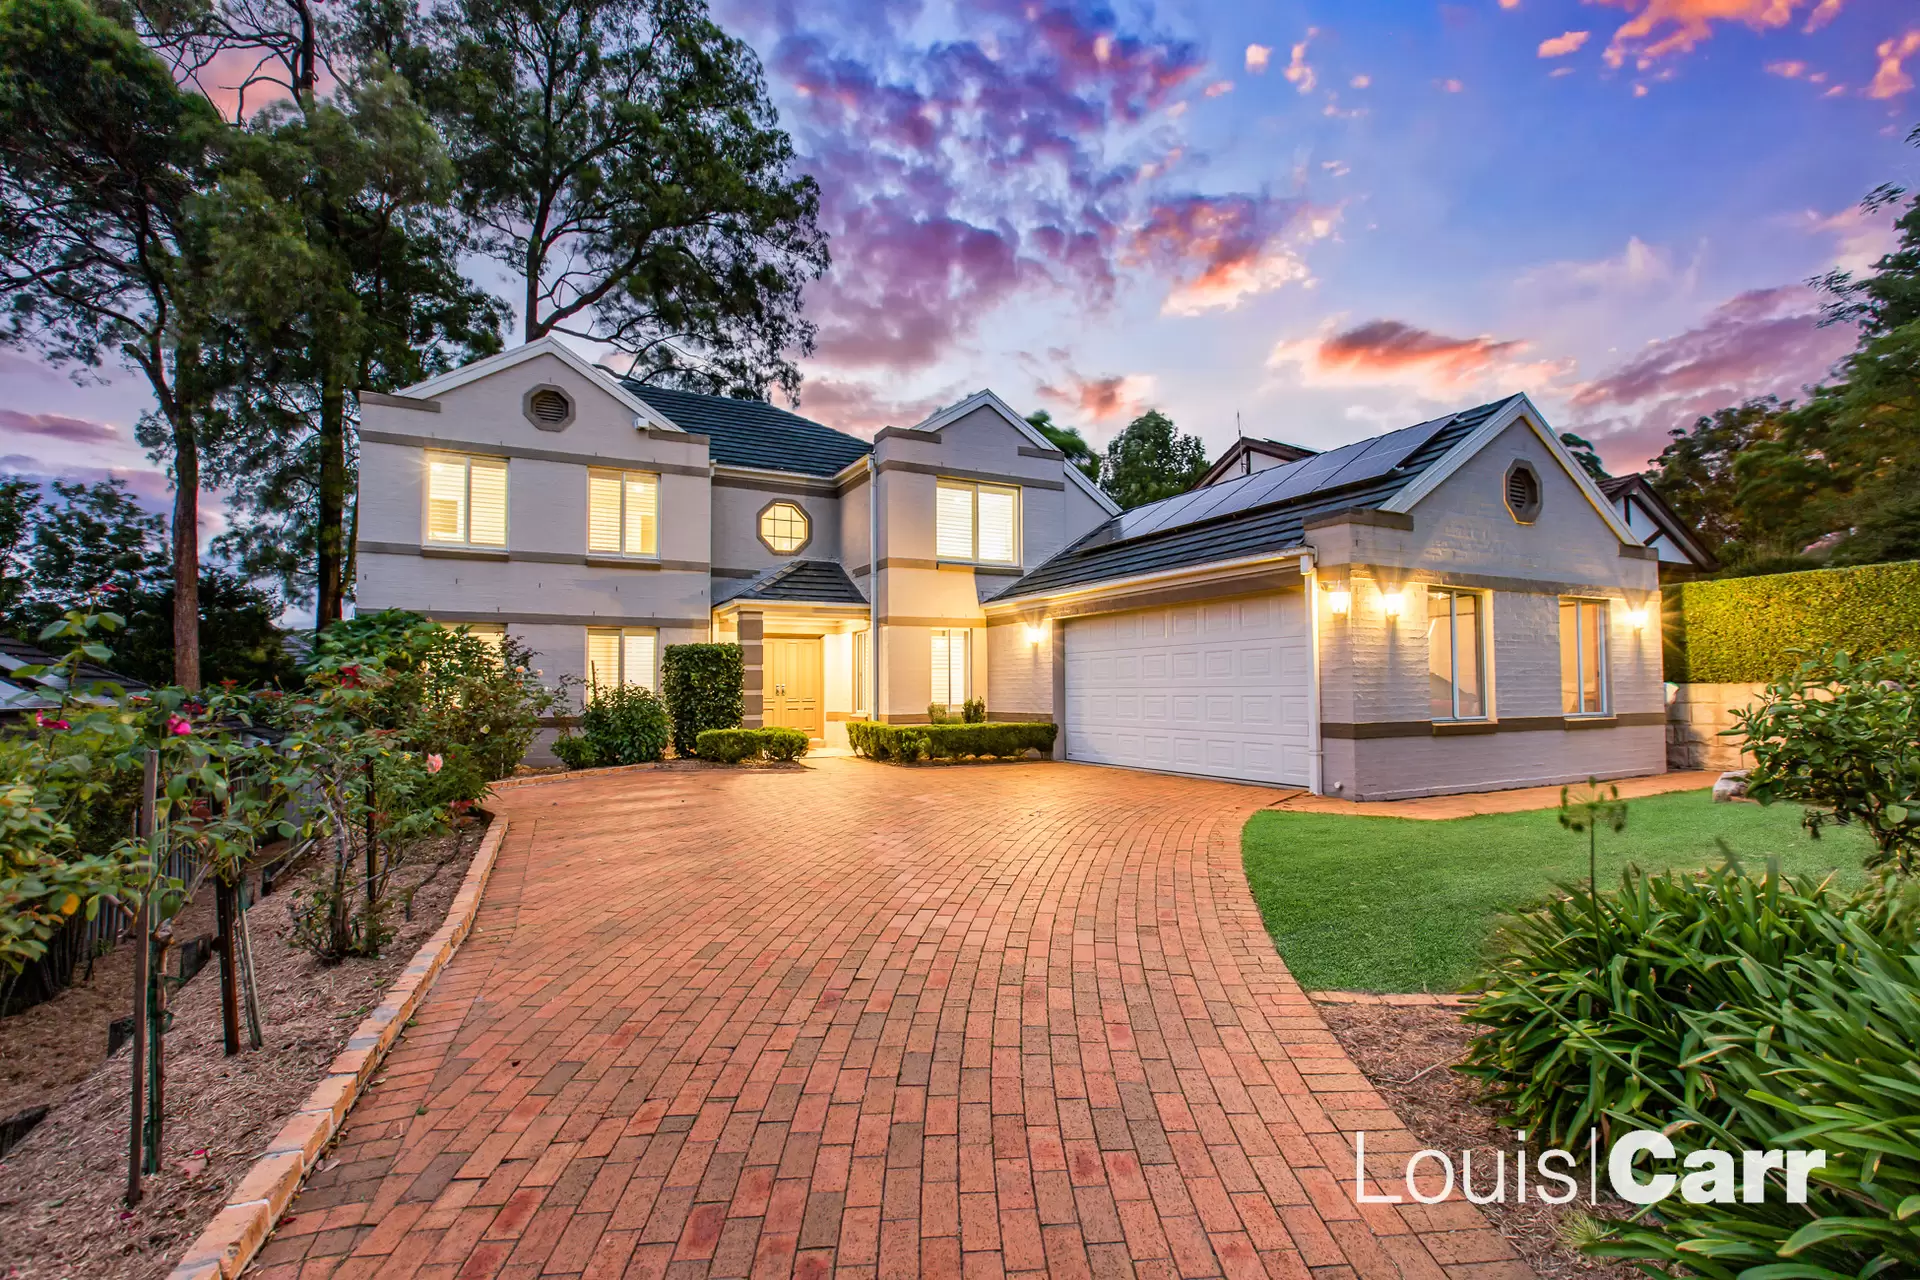 Photo #1: 138 Aiken Road, West Pennant Hills - For Sale by Louis Carr Real Estate